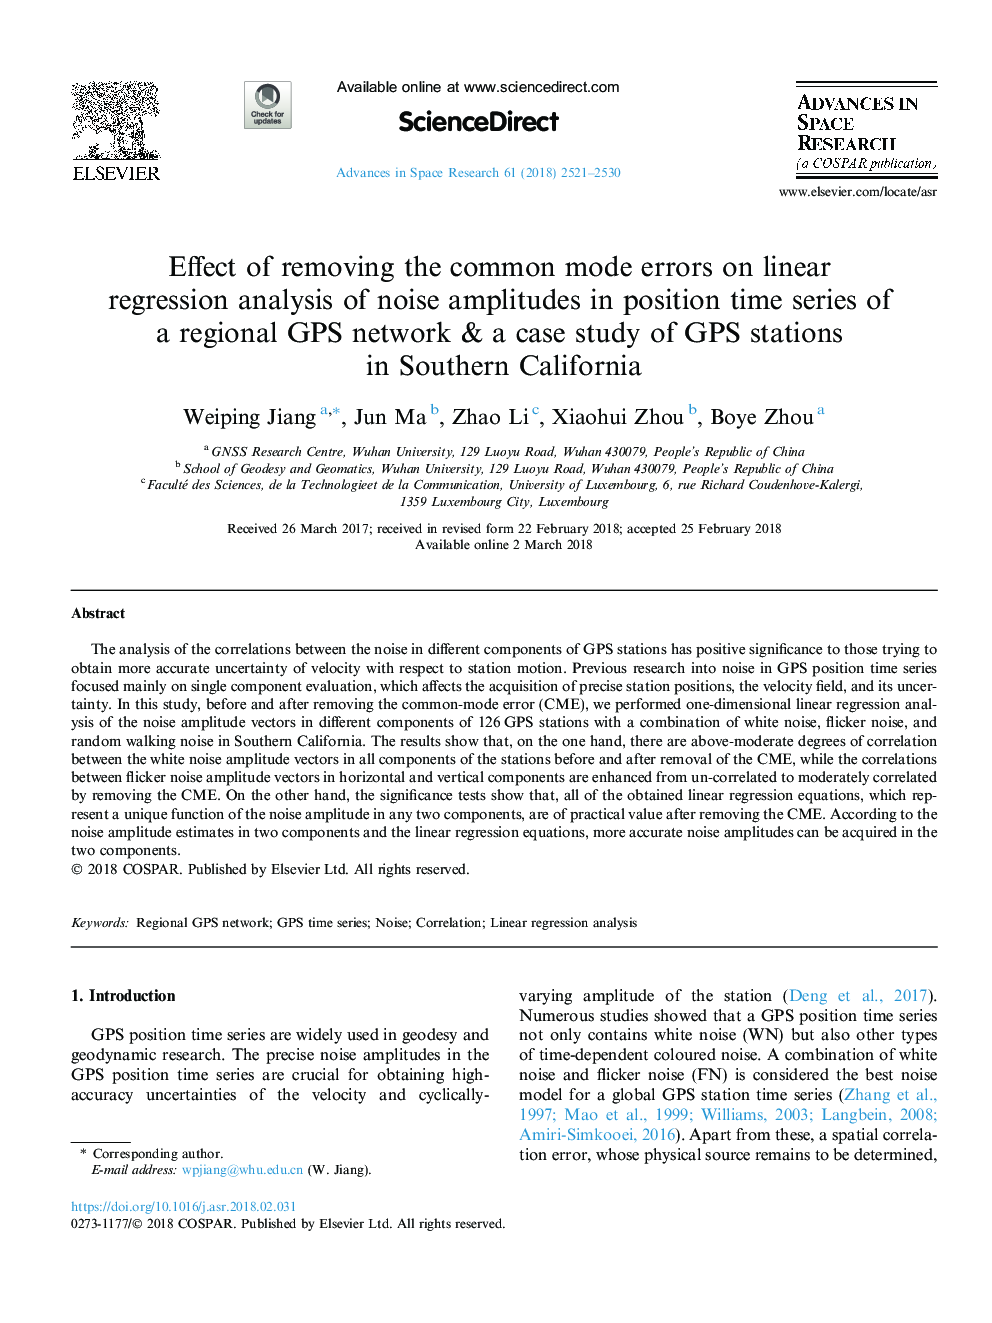 Effect of removing the common mode errors on linear regression analysis of noise amplitudes in position time series of a regional GPS network & a case study of GPS stations in Southern California